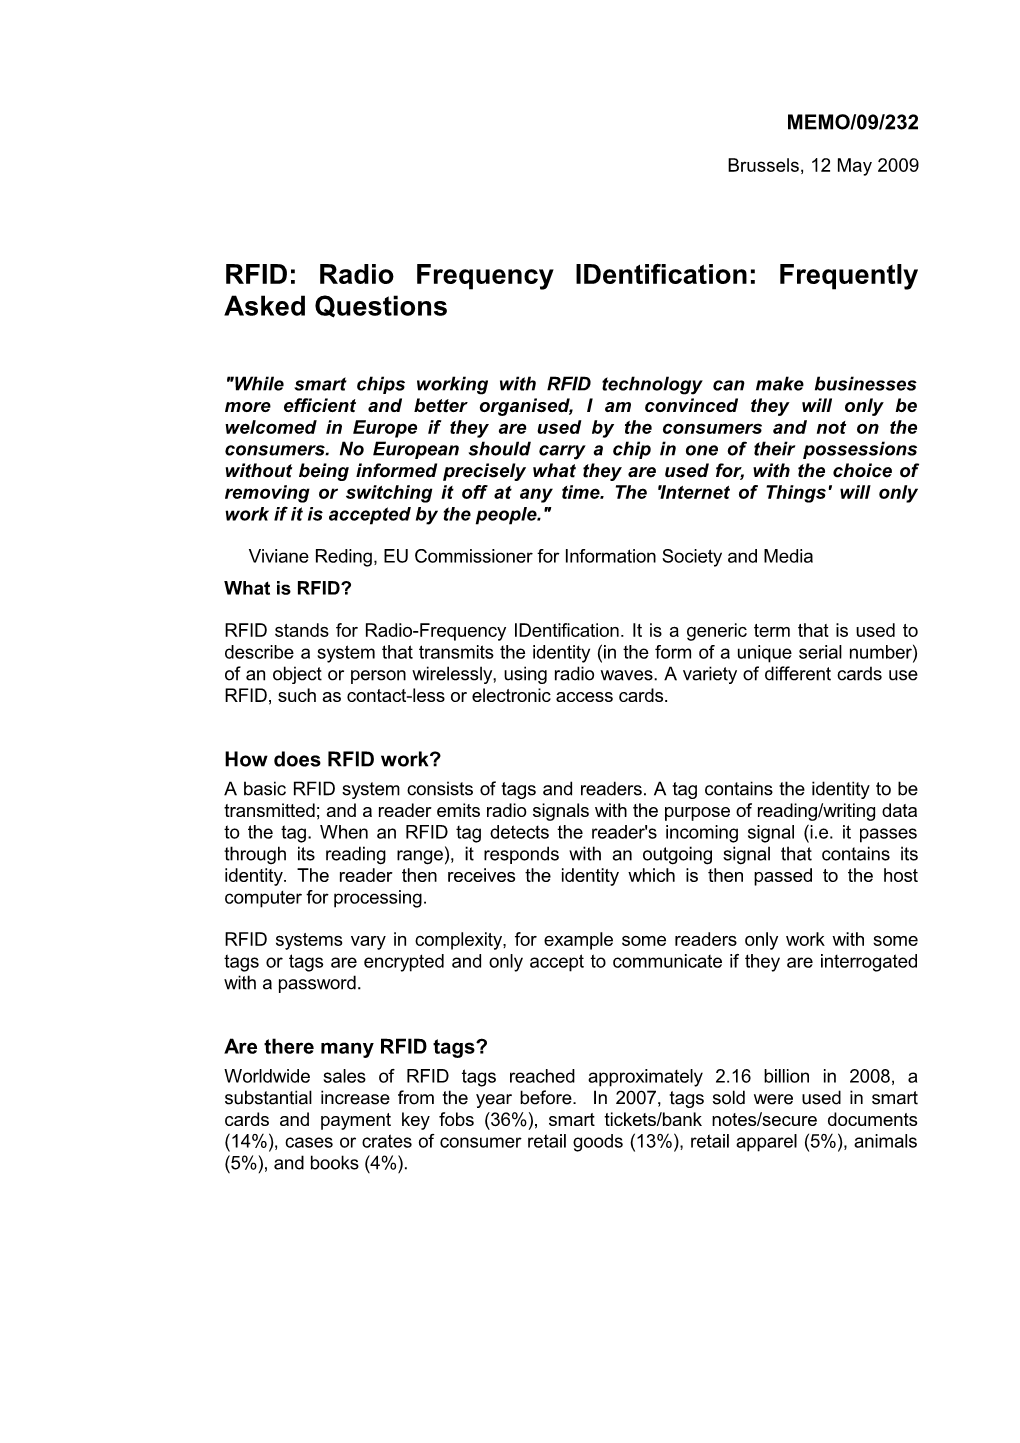 RFID: Radio Frequency Identification: Frequently Asked Questions